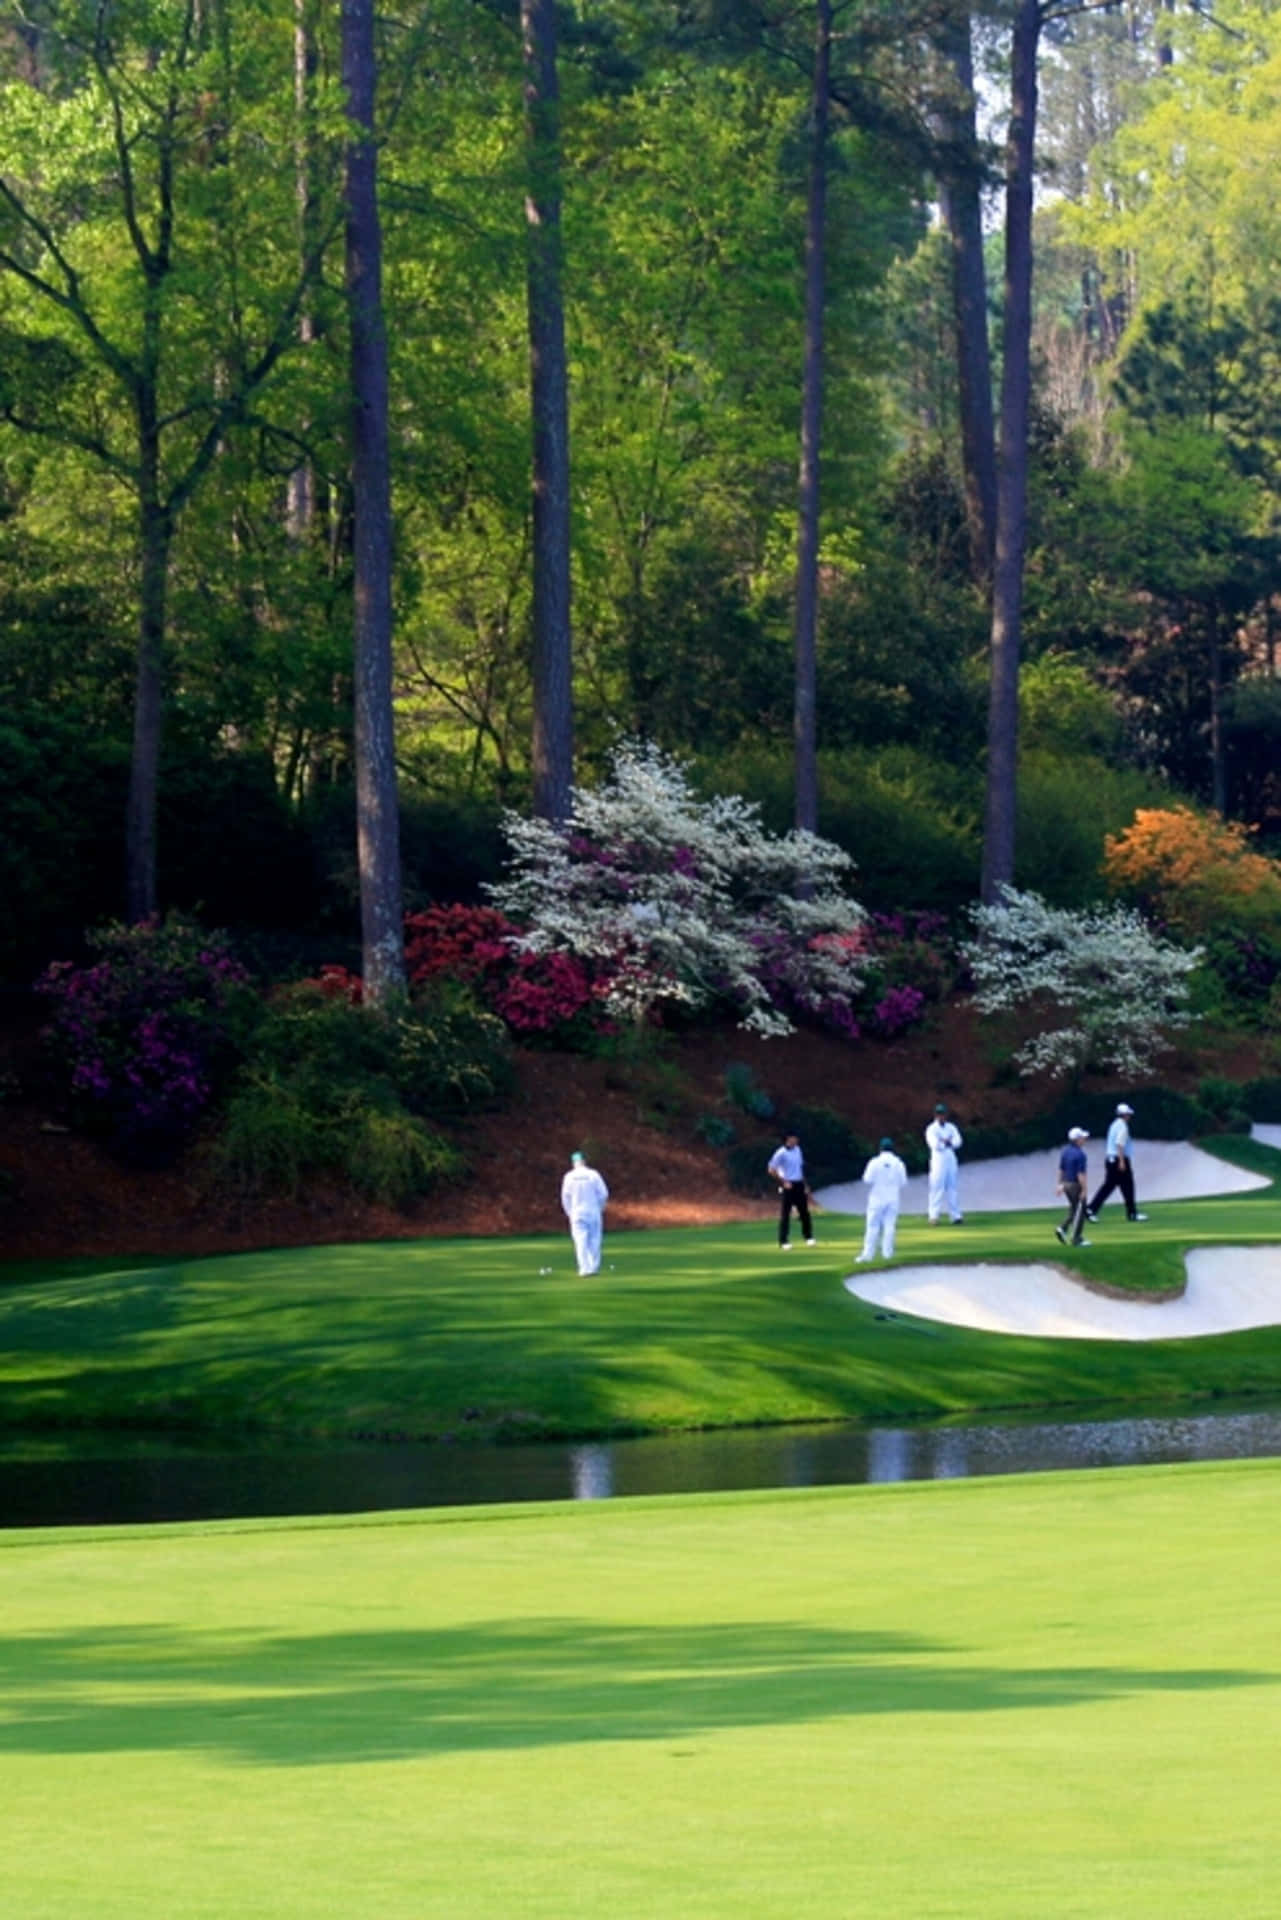 Enjoy a round of golf at Augusta National Golf Course Wallpaper